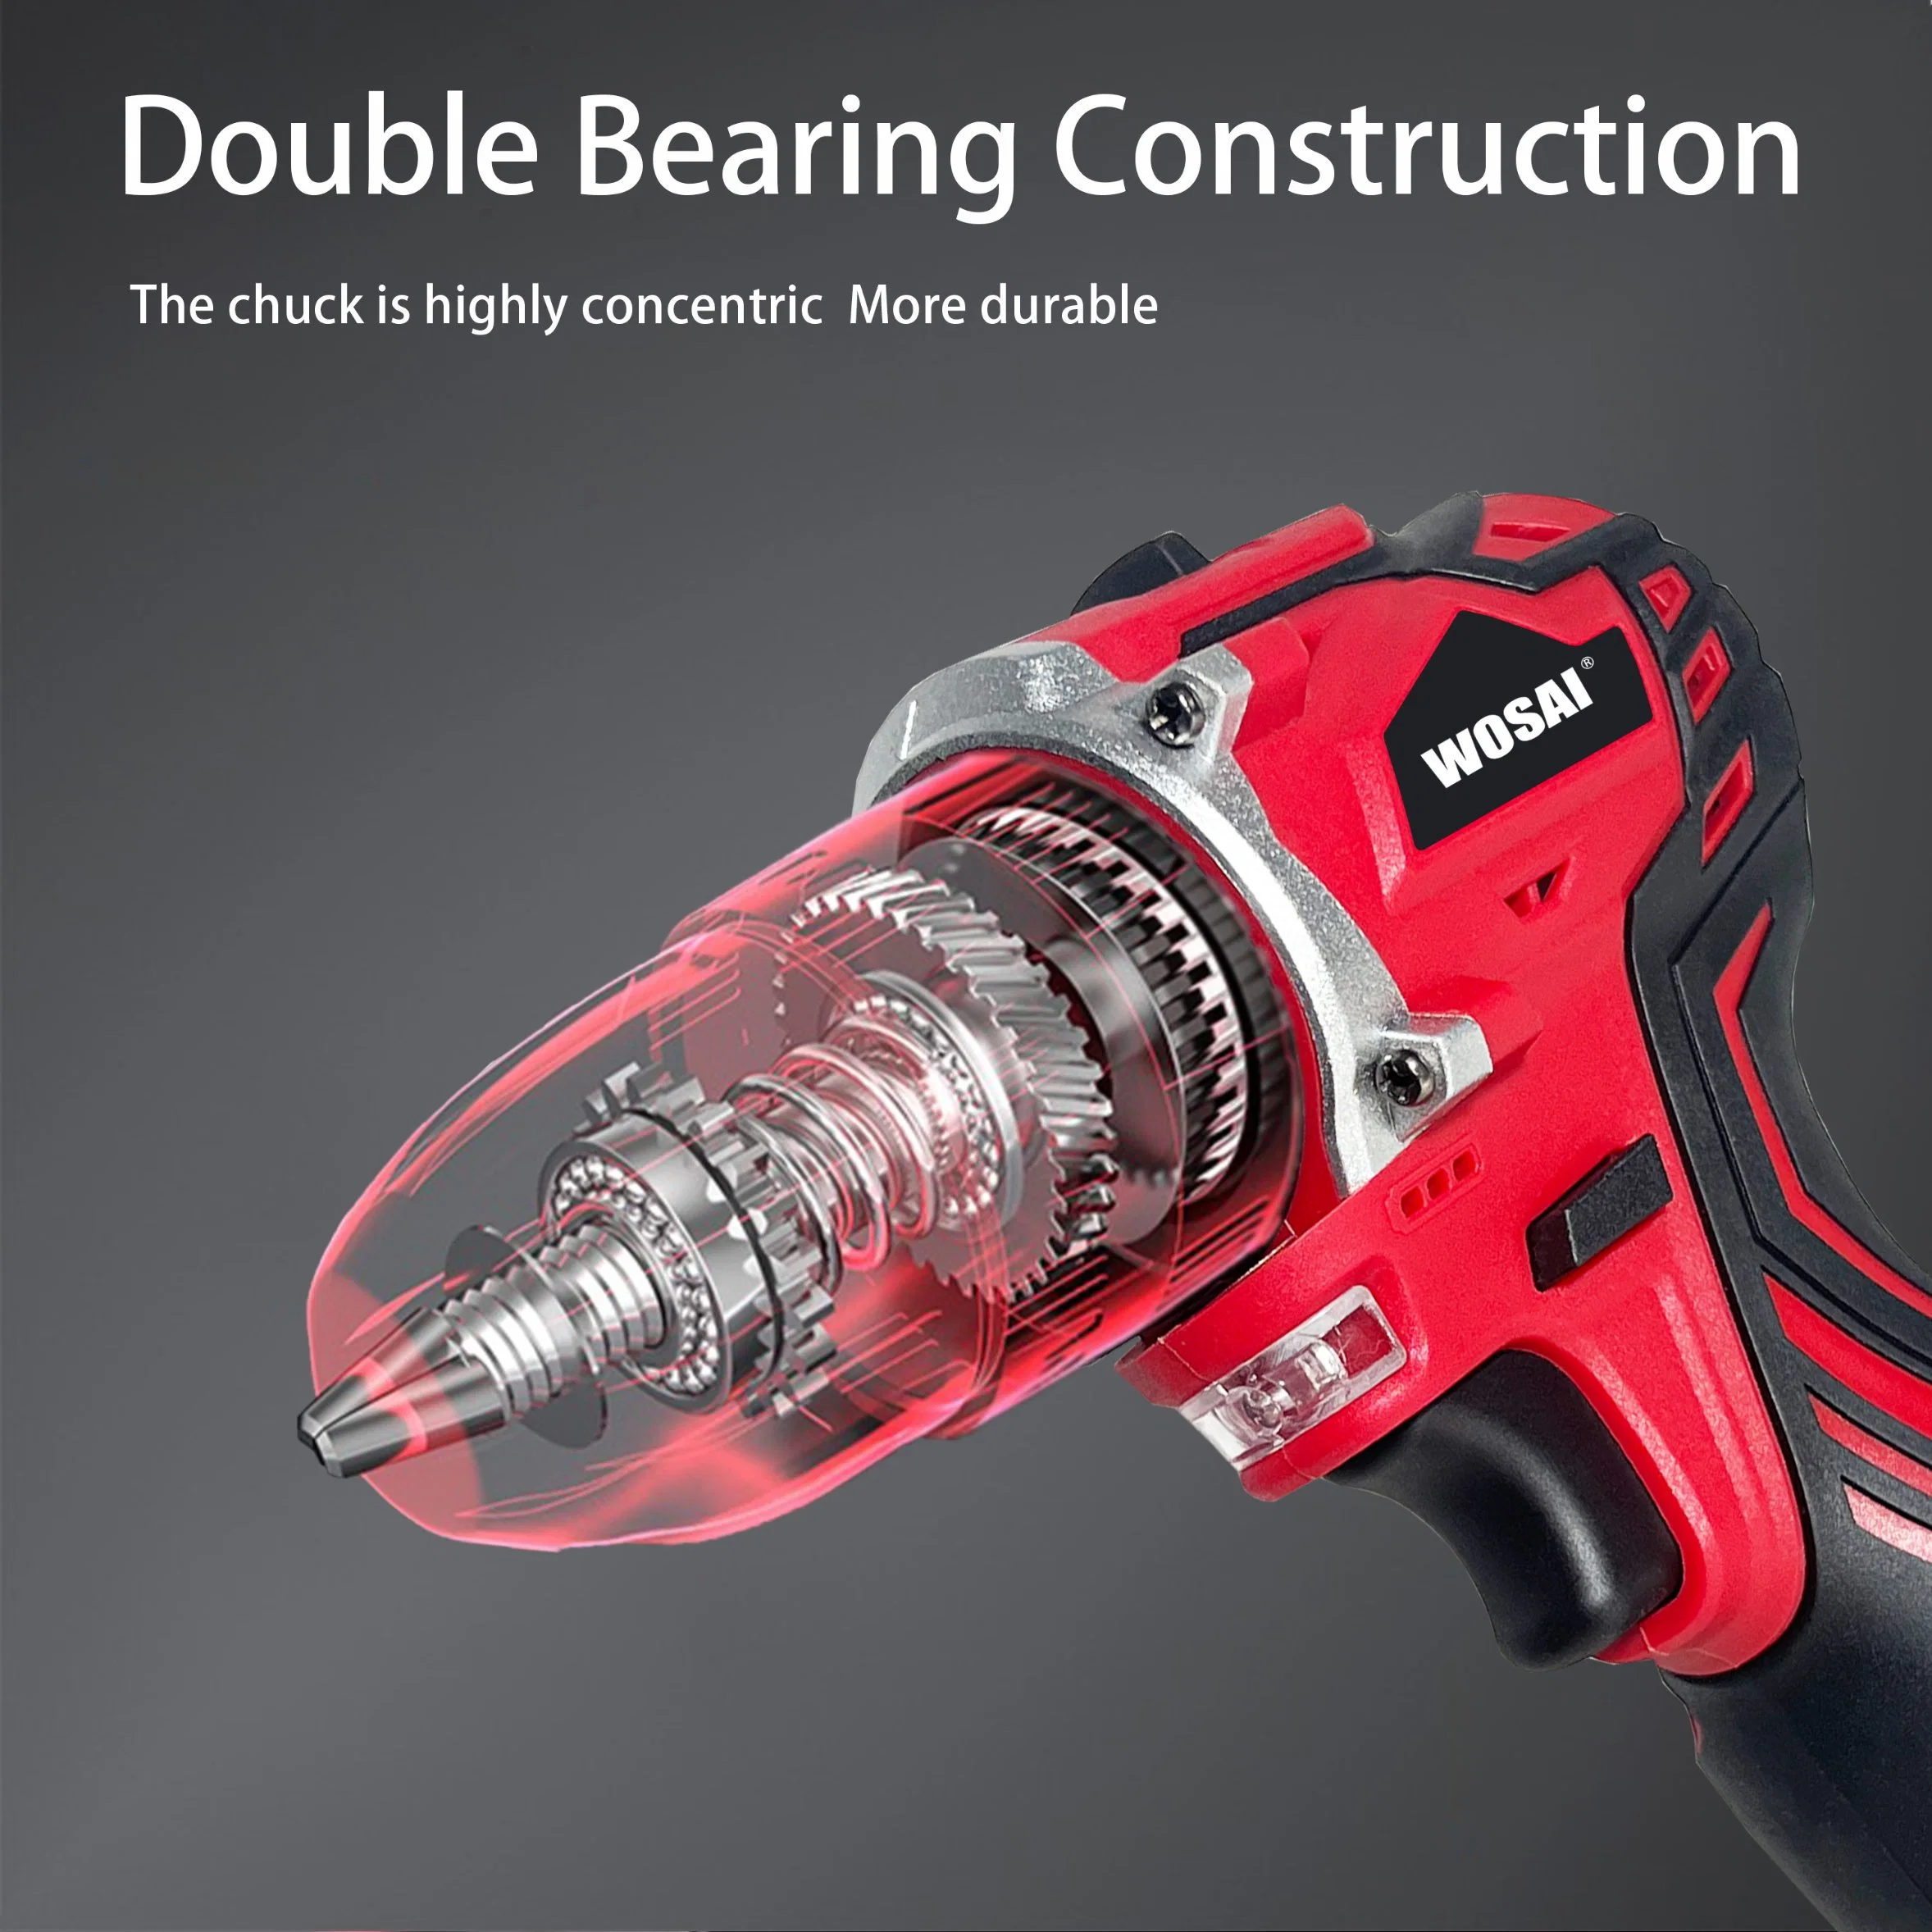 16V Brushless Battery Screwdriver HSS Drill Bit Auger Tools Hardware Power Drill Screw Drilling Machine